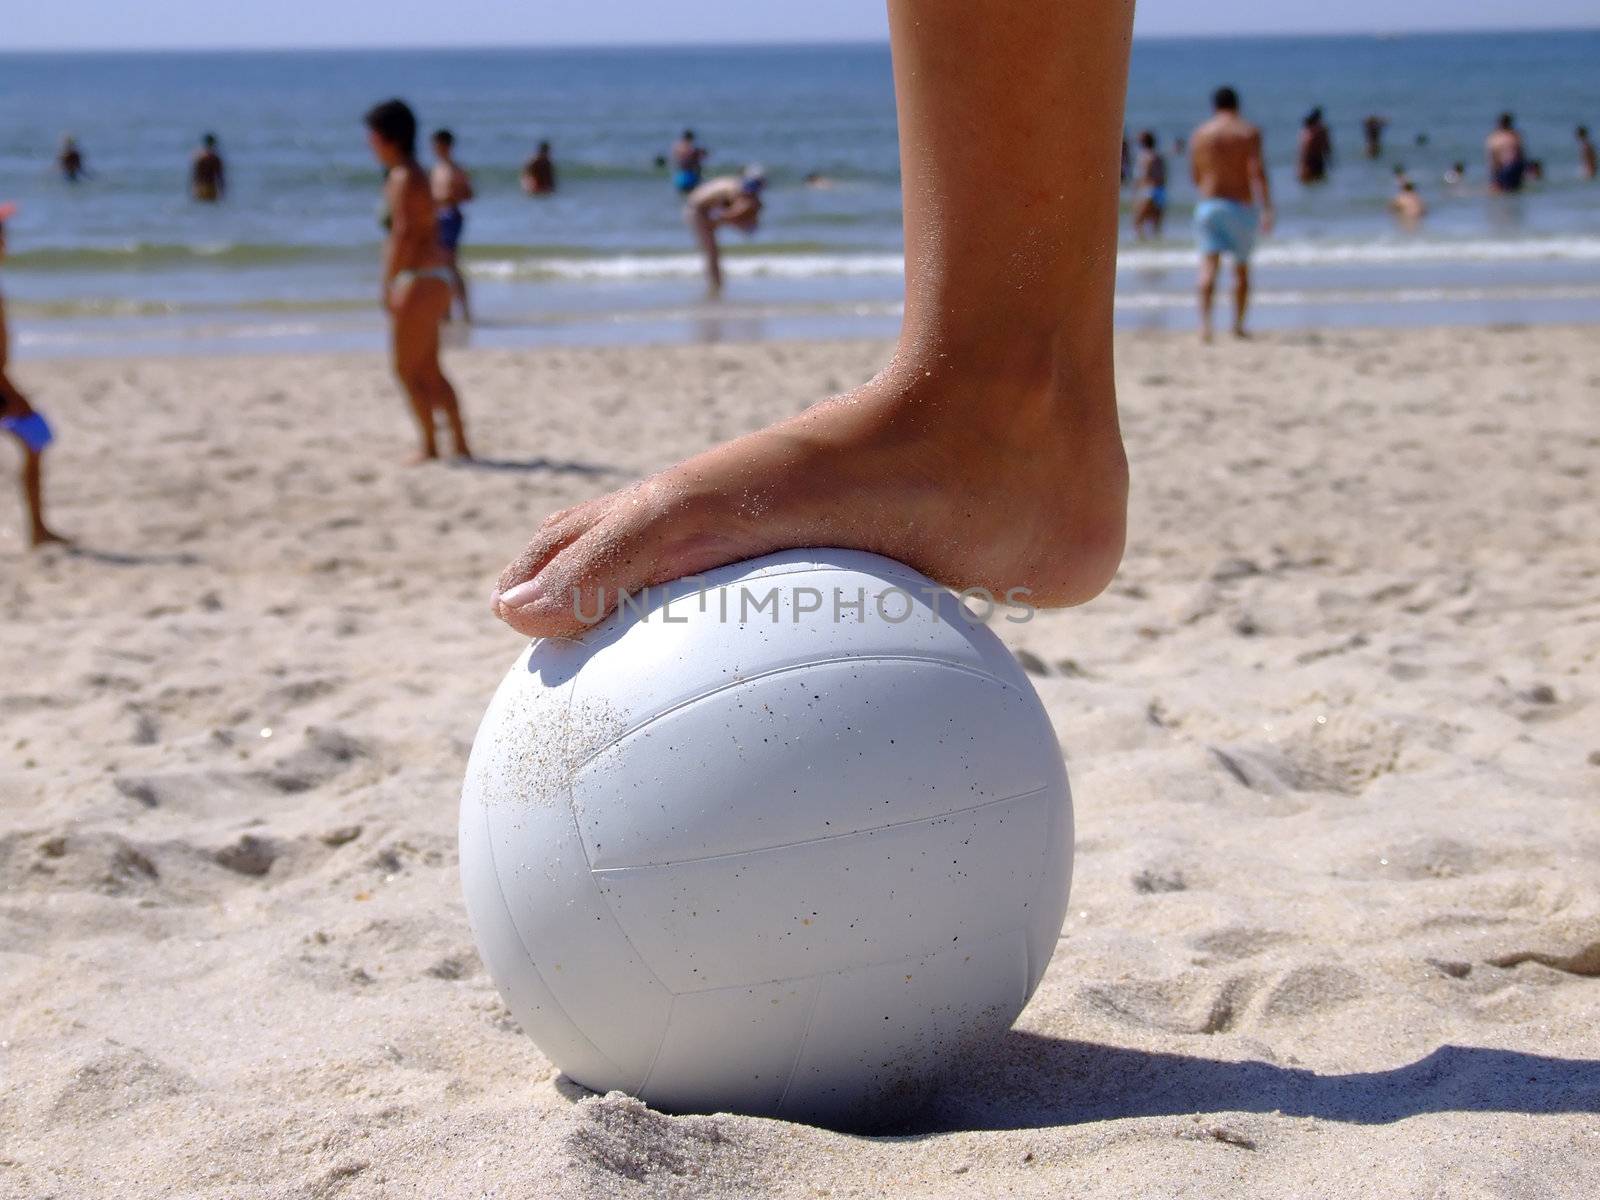 Foot on the volleyball  by PauloResende